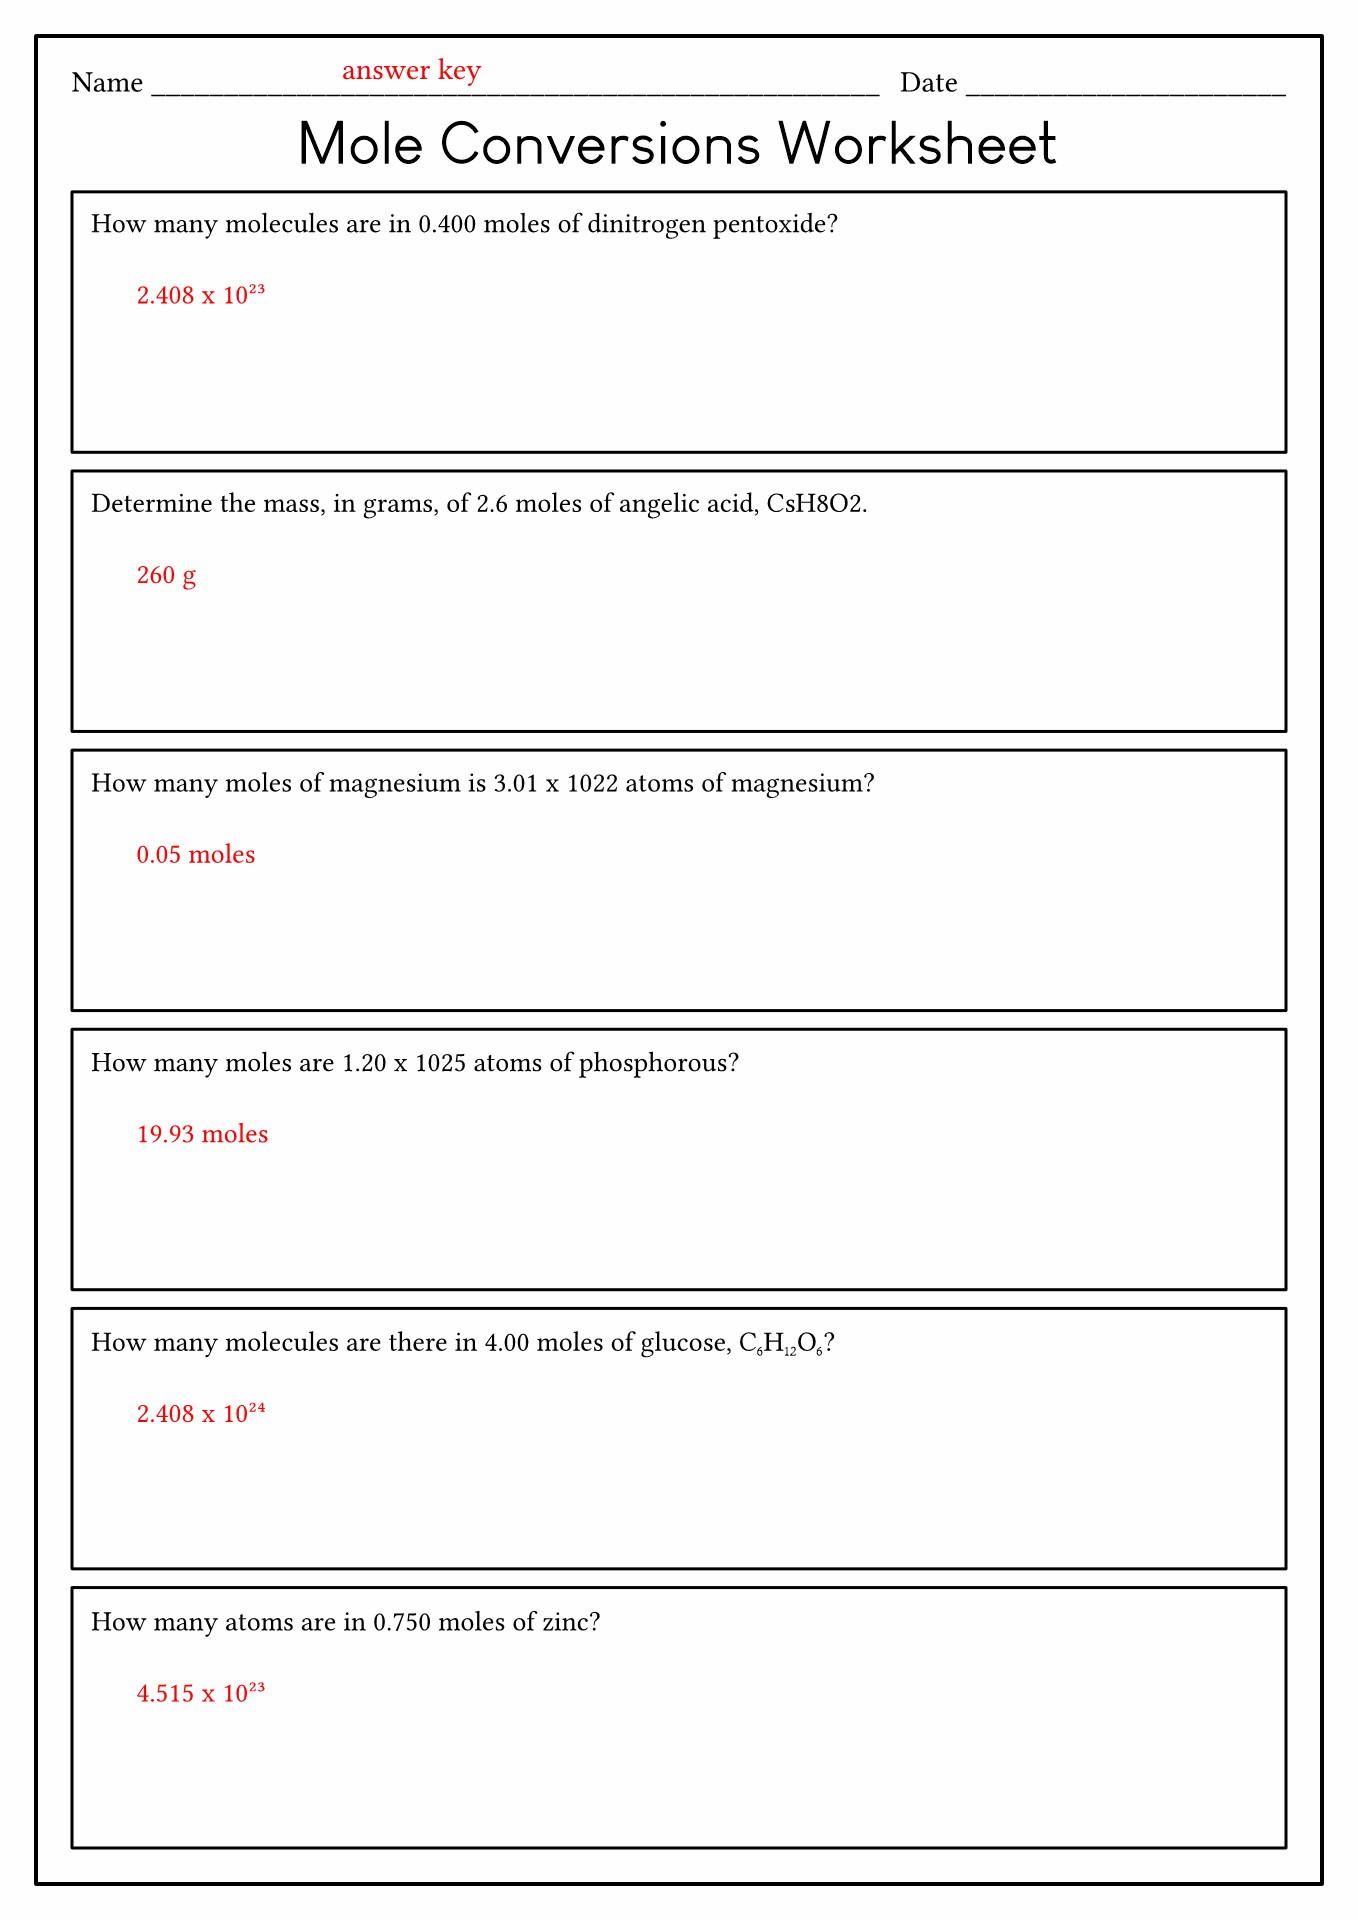 Mole Conversion Worksheet with Answers